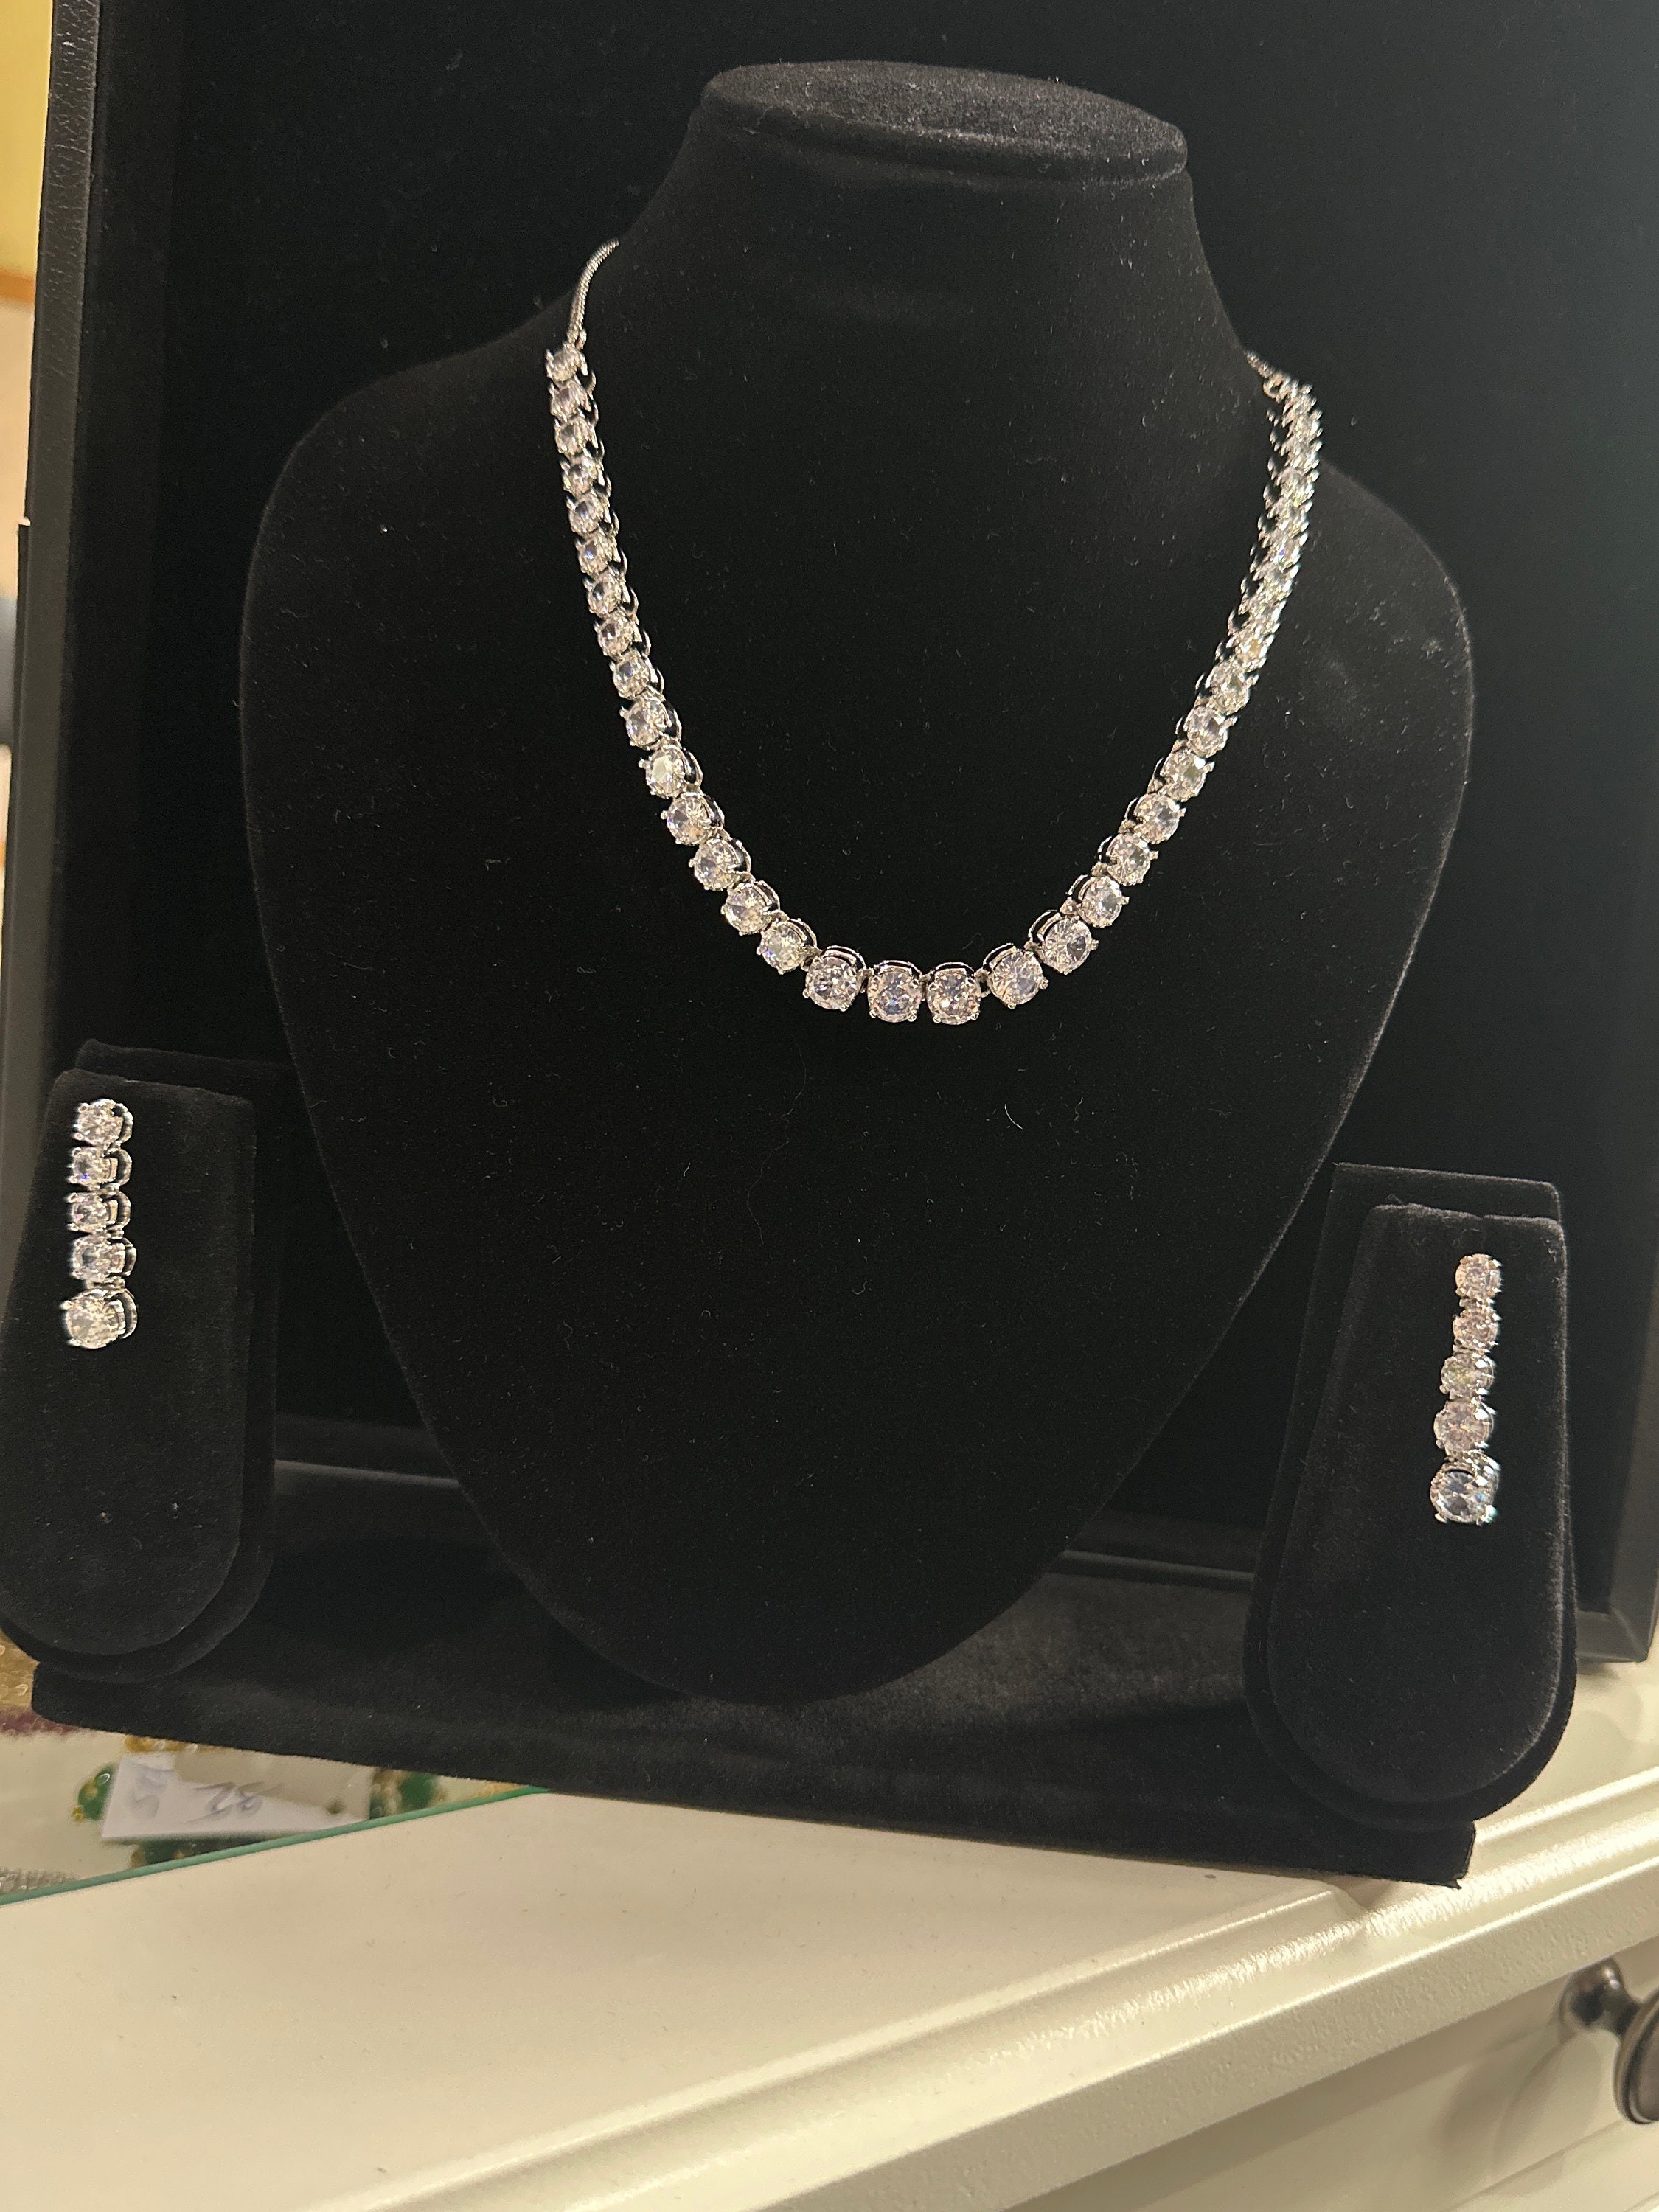 My new tennis bracelet and necklace set just arrived! : r/Moissanite